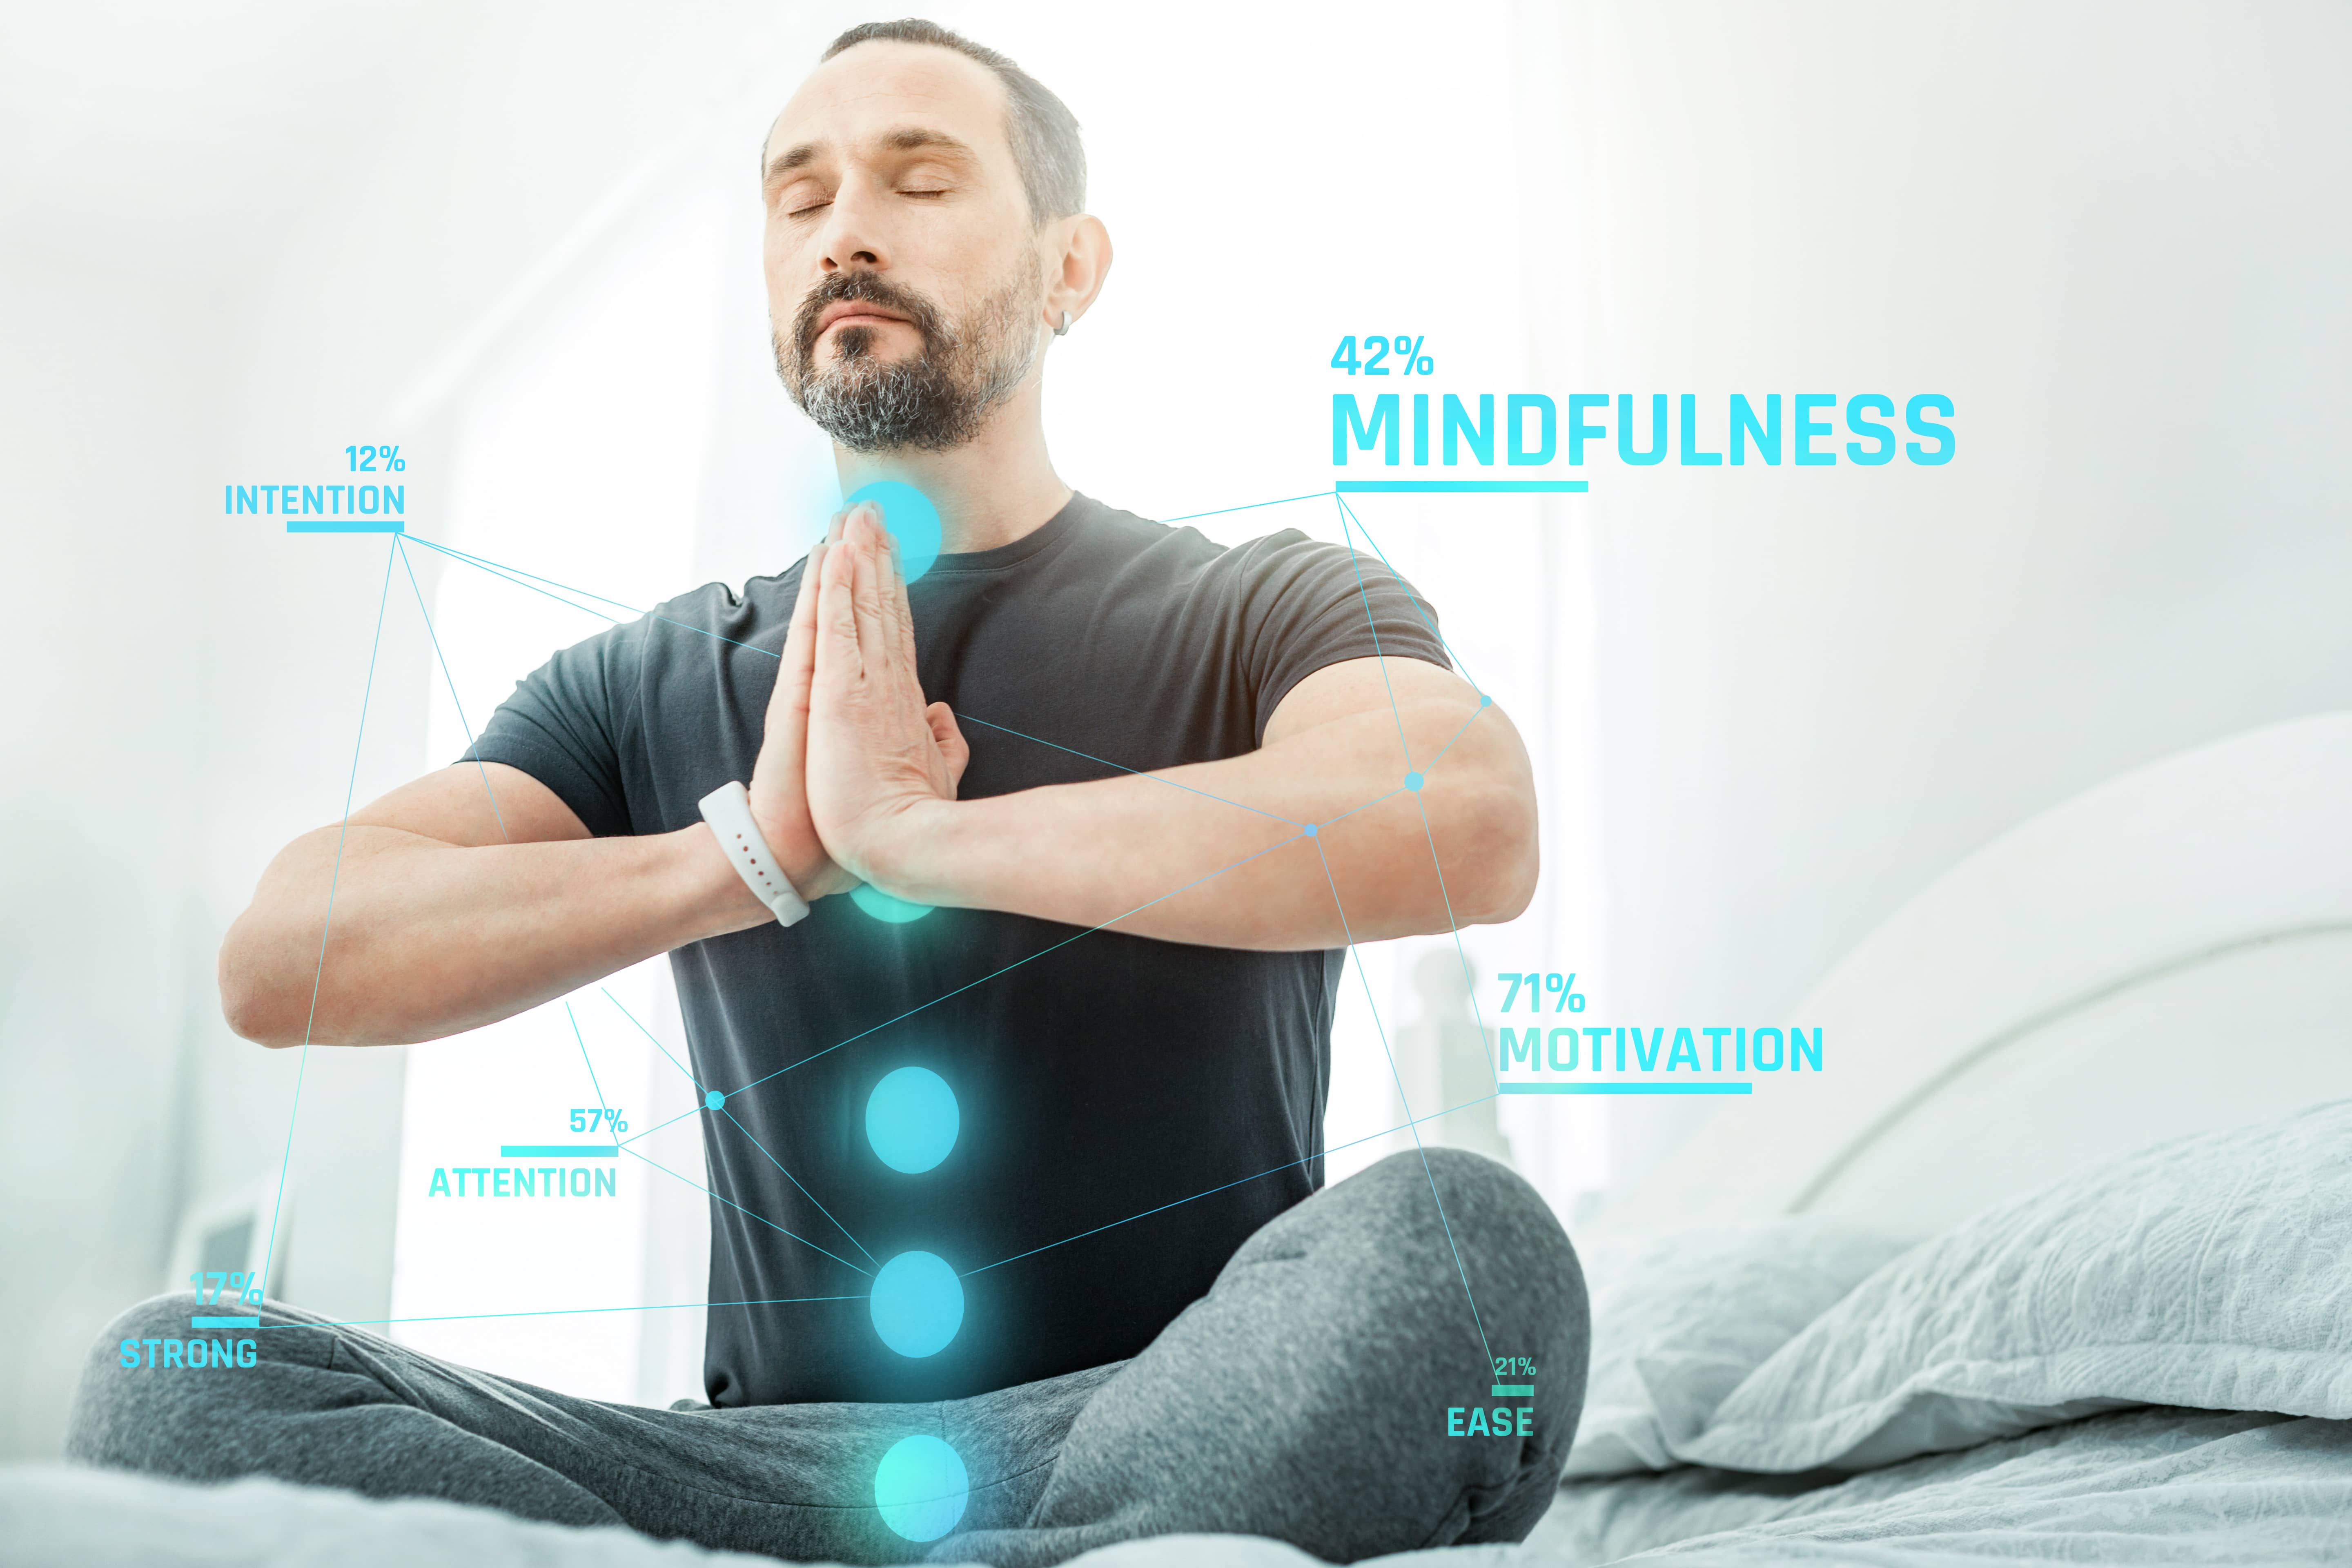 Meditation, yoga, mindfulness, and deep breathing are great ways to build brain fitness.